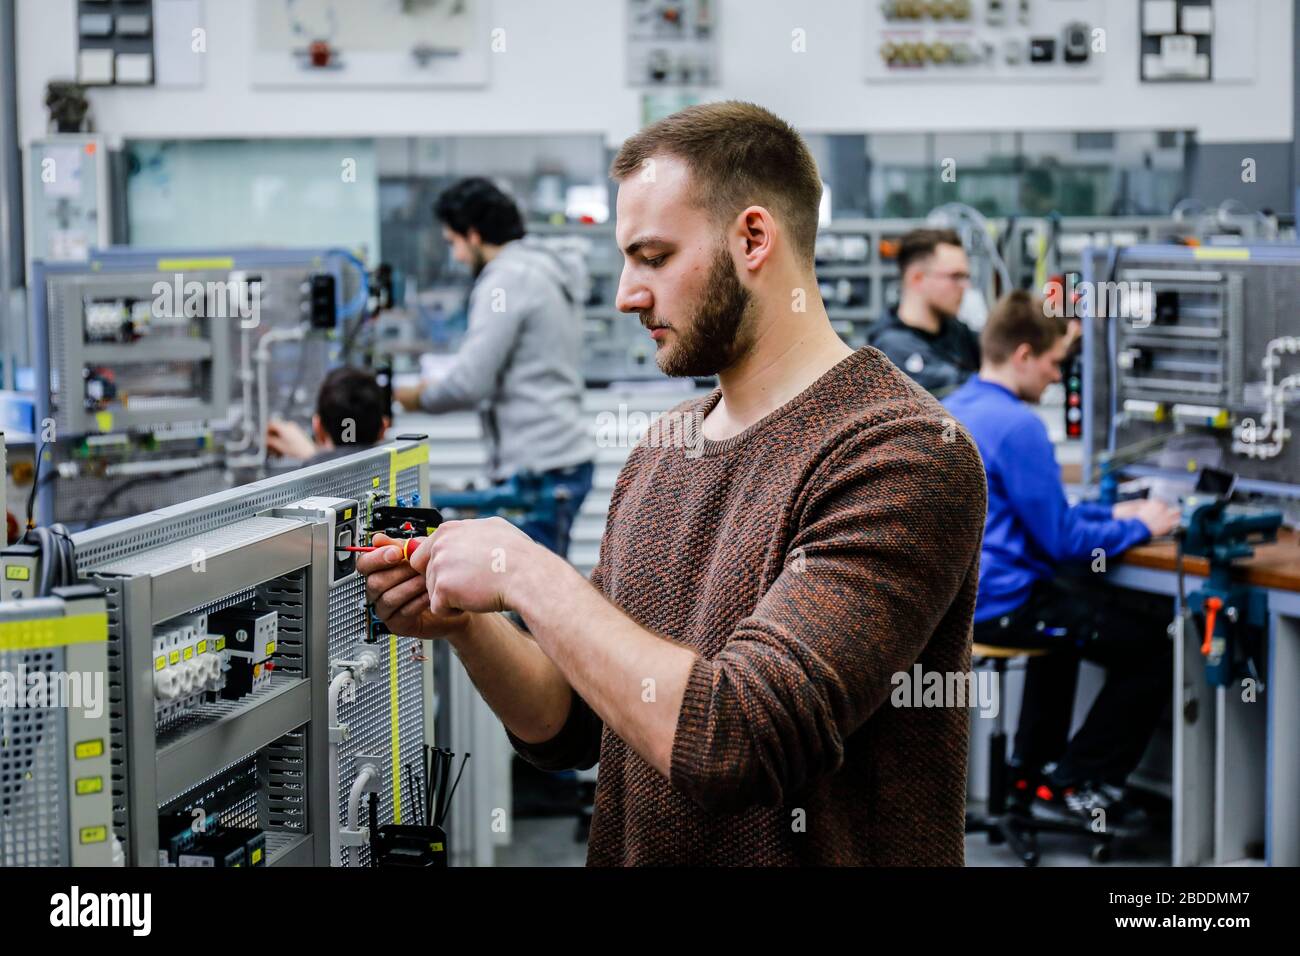 12.02.2020, Remscheid, North Rhine-Westphalia, Germany - Trainee in electrical professions, an industrial electrician assembles a circuit, vocational Stock Photo